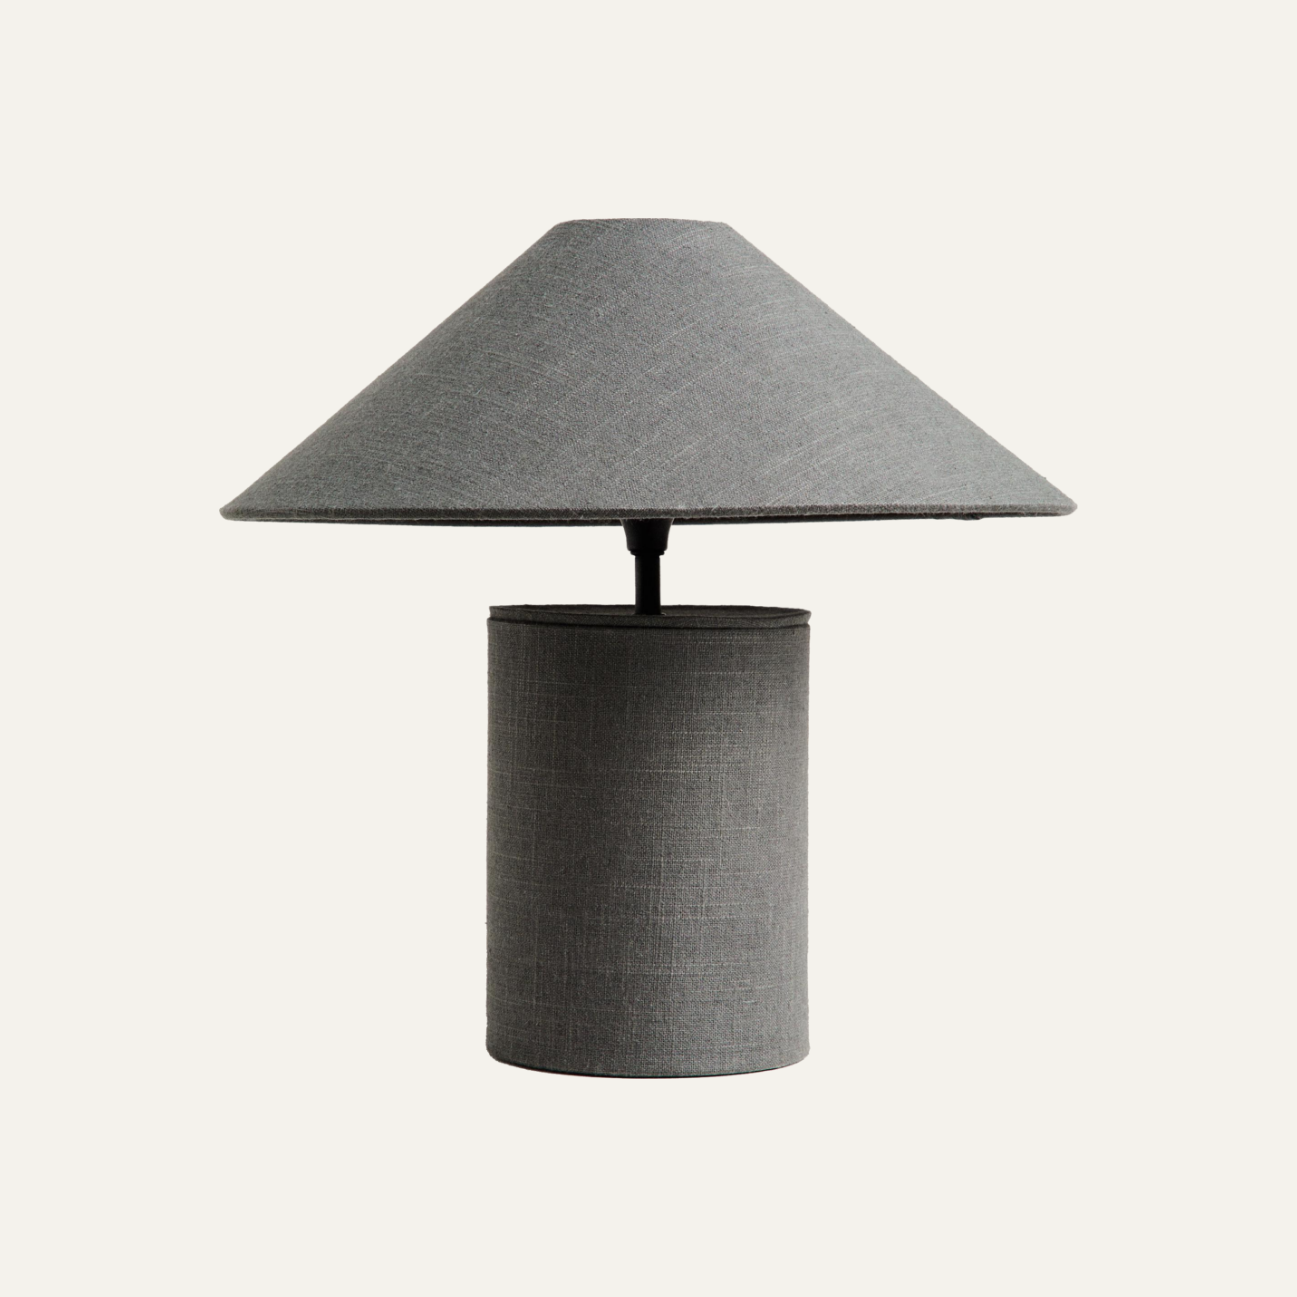 Fabric Table Lamp by Zara Home